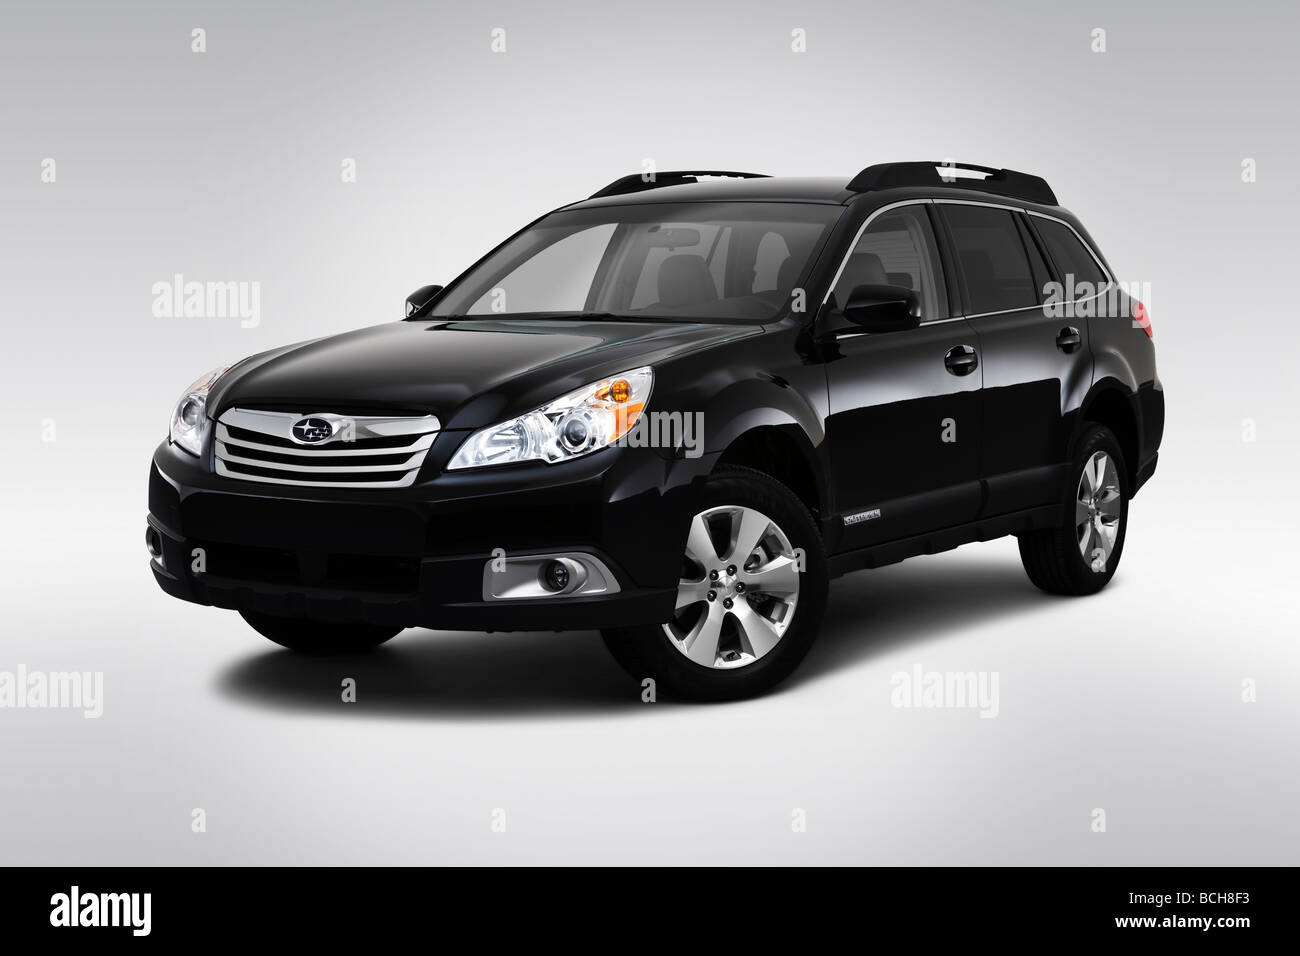 2010 Subaru Outback 3.6 R in Black - Front angle view Stock Photo